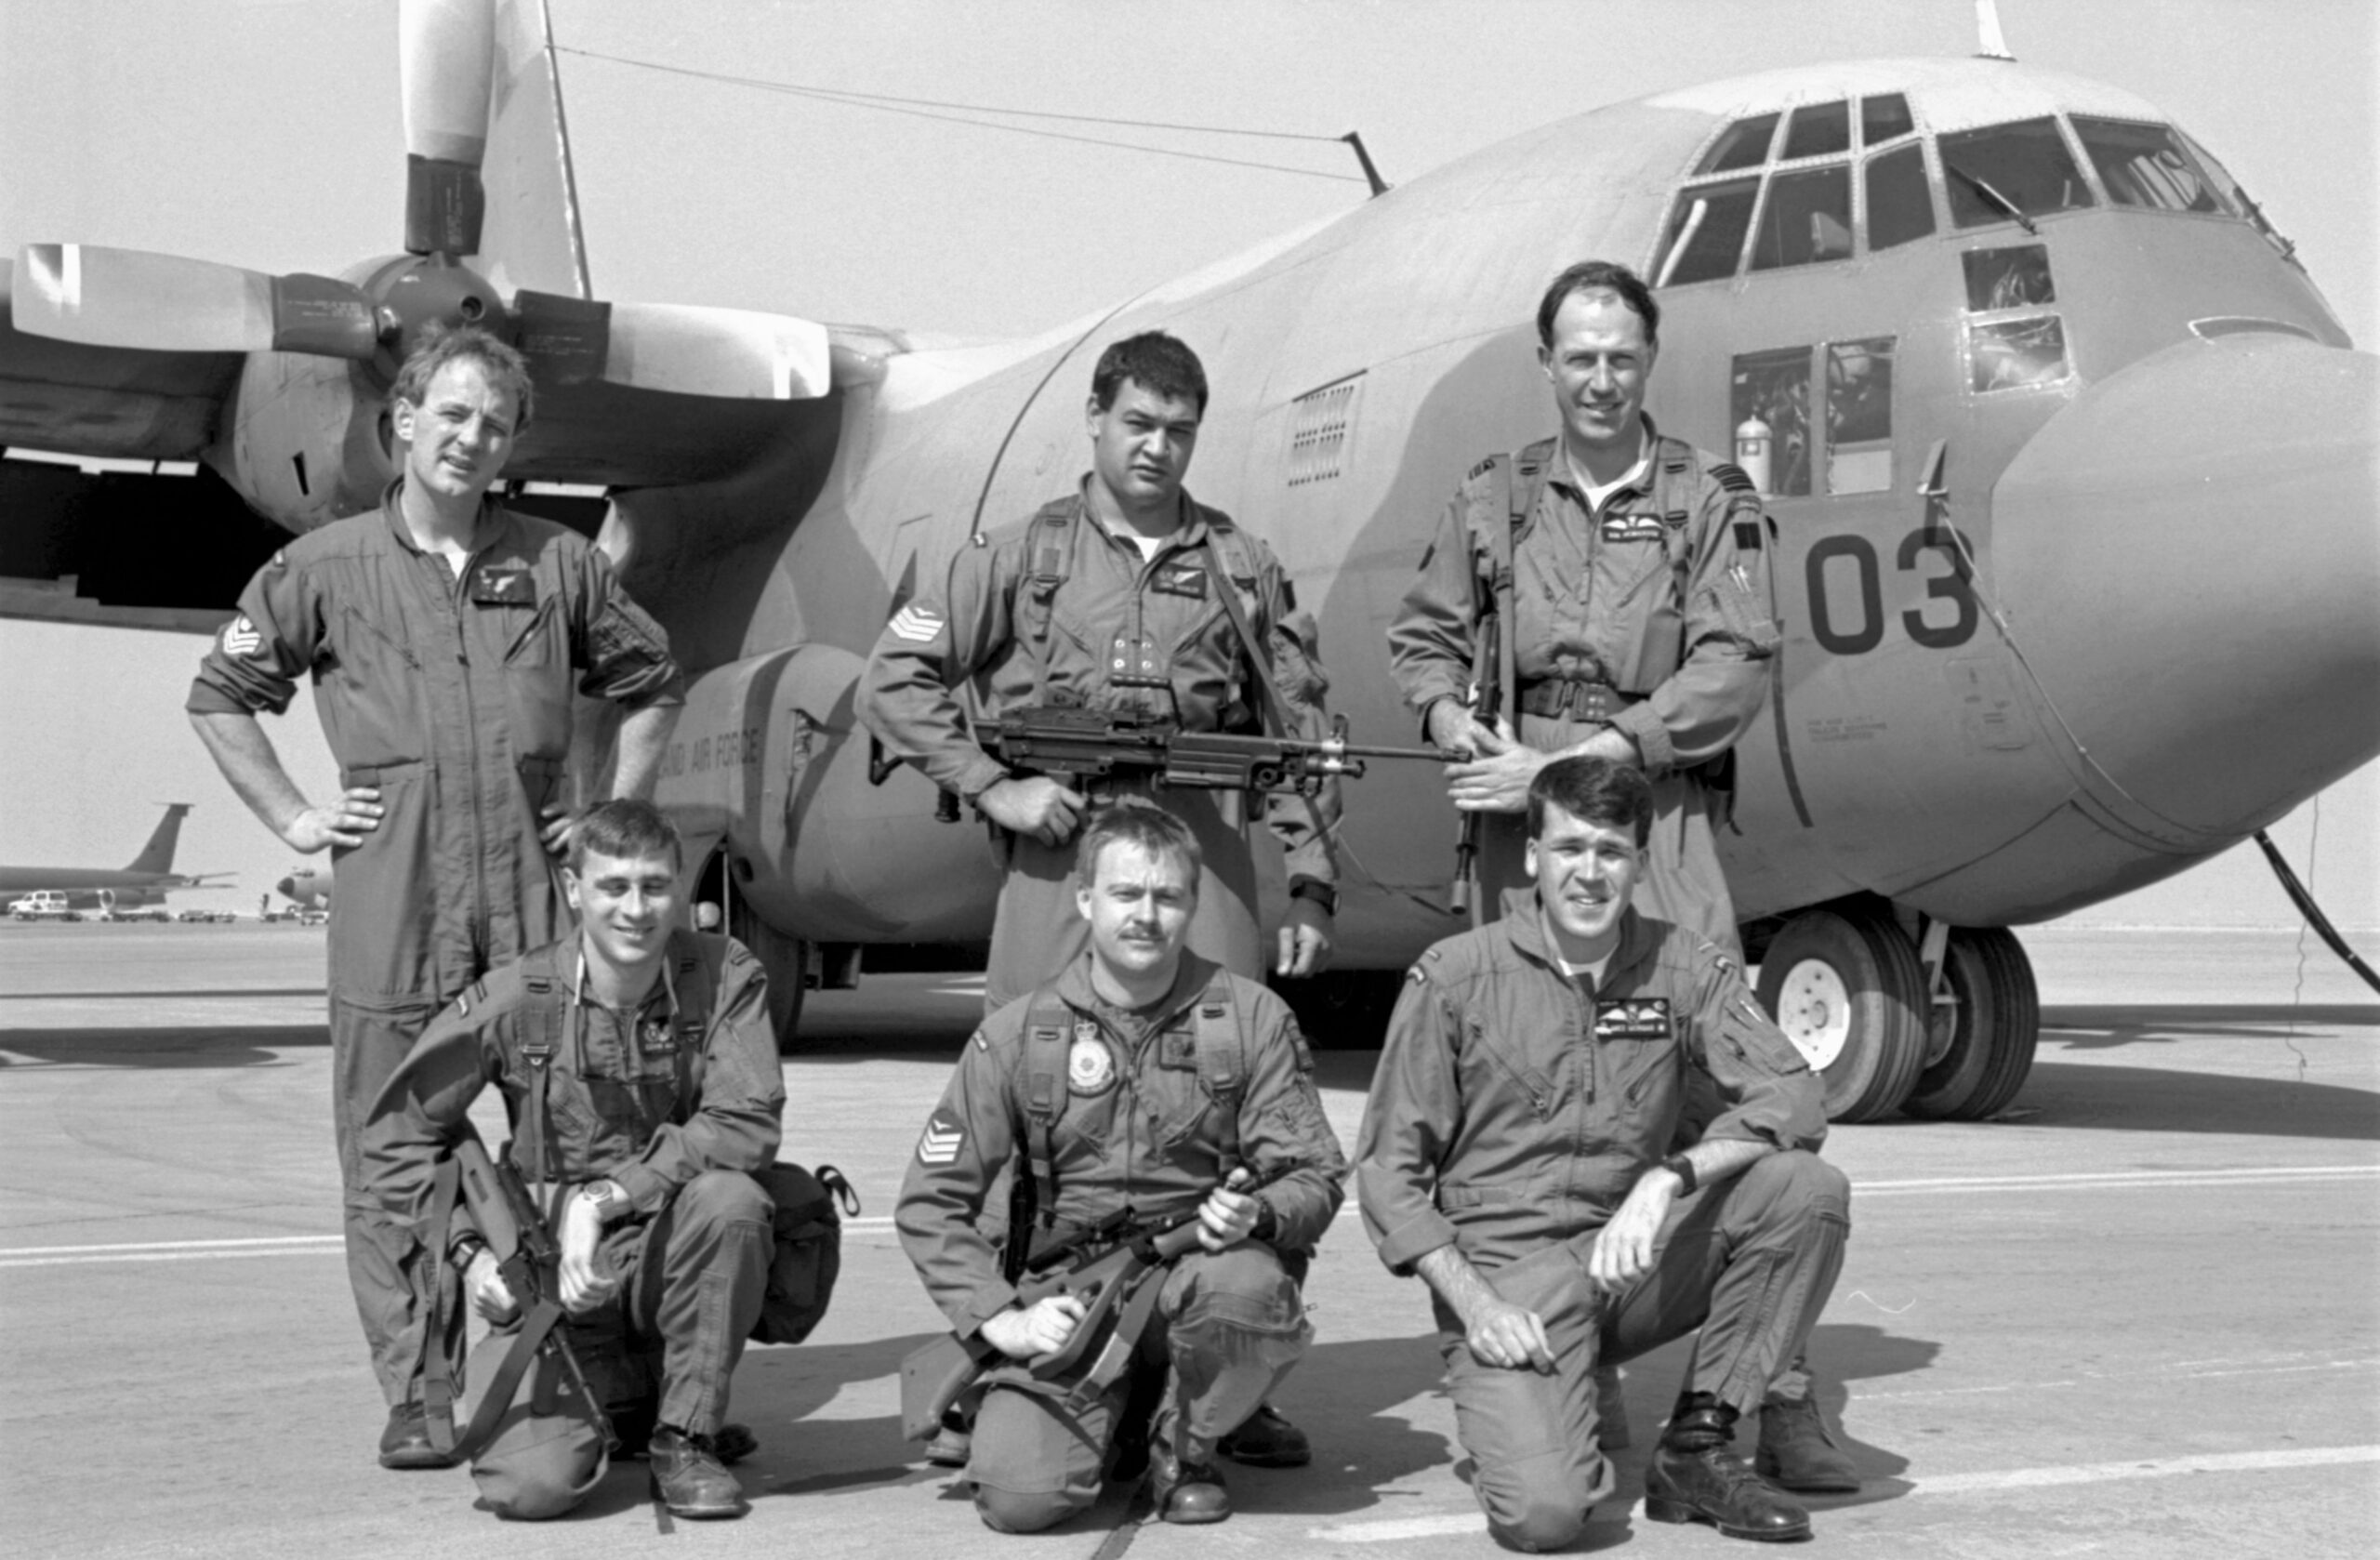 Crew of No. 40 Squadron Hercules NZ7003. Presumed to be at Riyadh, Saudi Arabia, 1991. 
L-R: Back; Flight Sergeant Bruce Melvin, Sergeant J Buchler, Wing Commander Robert Henderson (Detachment Commander and aircraft captain)
Front; Flying Officer Kevin McEvoy, Sergeant Ty Cochran, Flying Officer M Morgan. Image ref PD21-21-91, RNZAF Official.